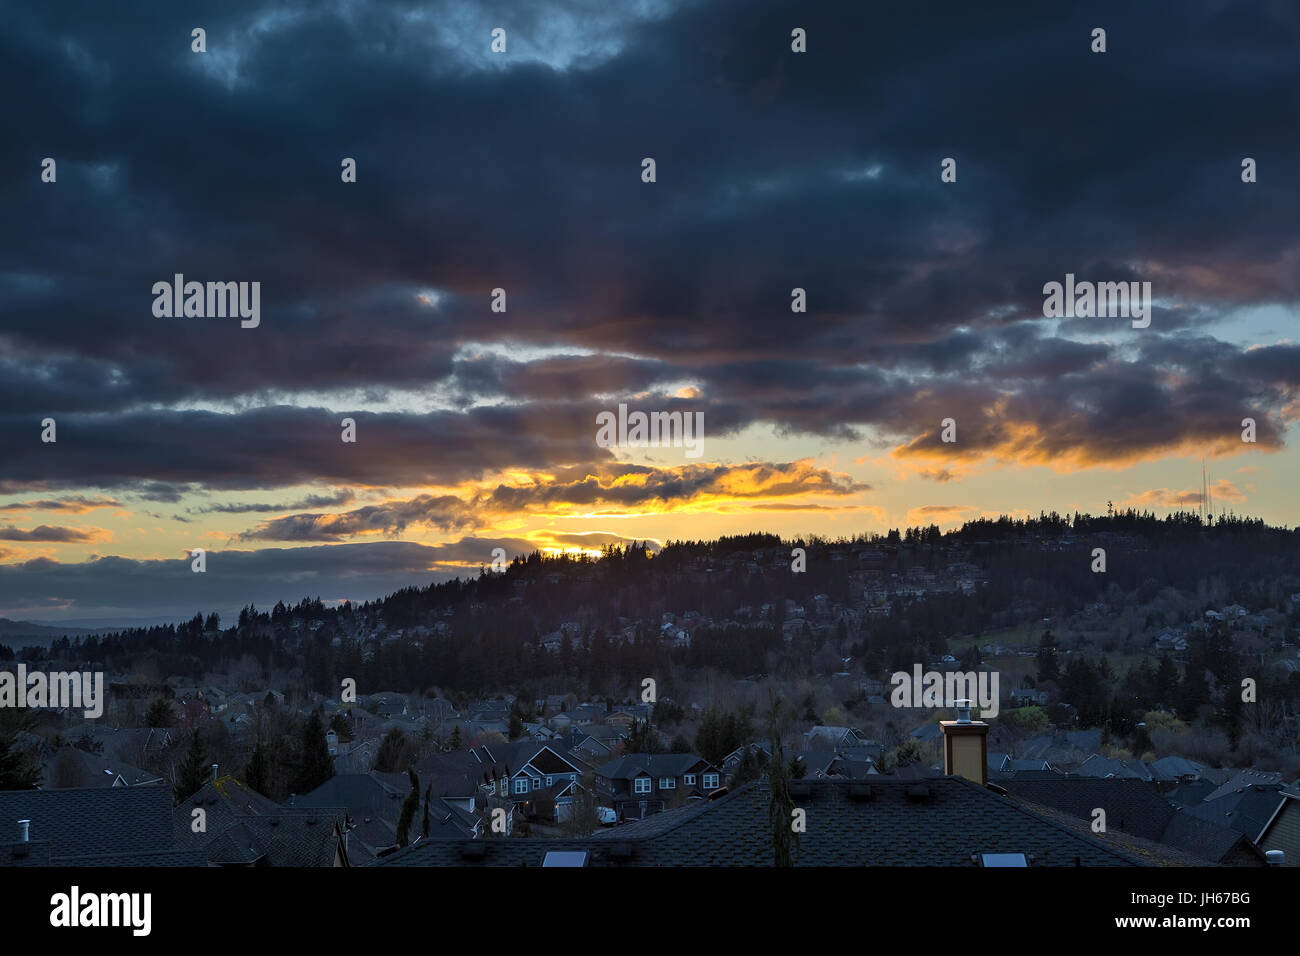 Stormy sky over Happy Valley Oregon residential suburban neighborhood during sunset Stock Photo